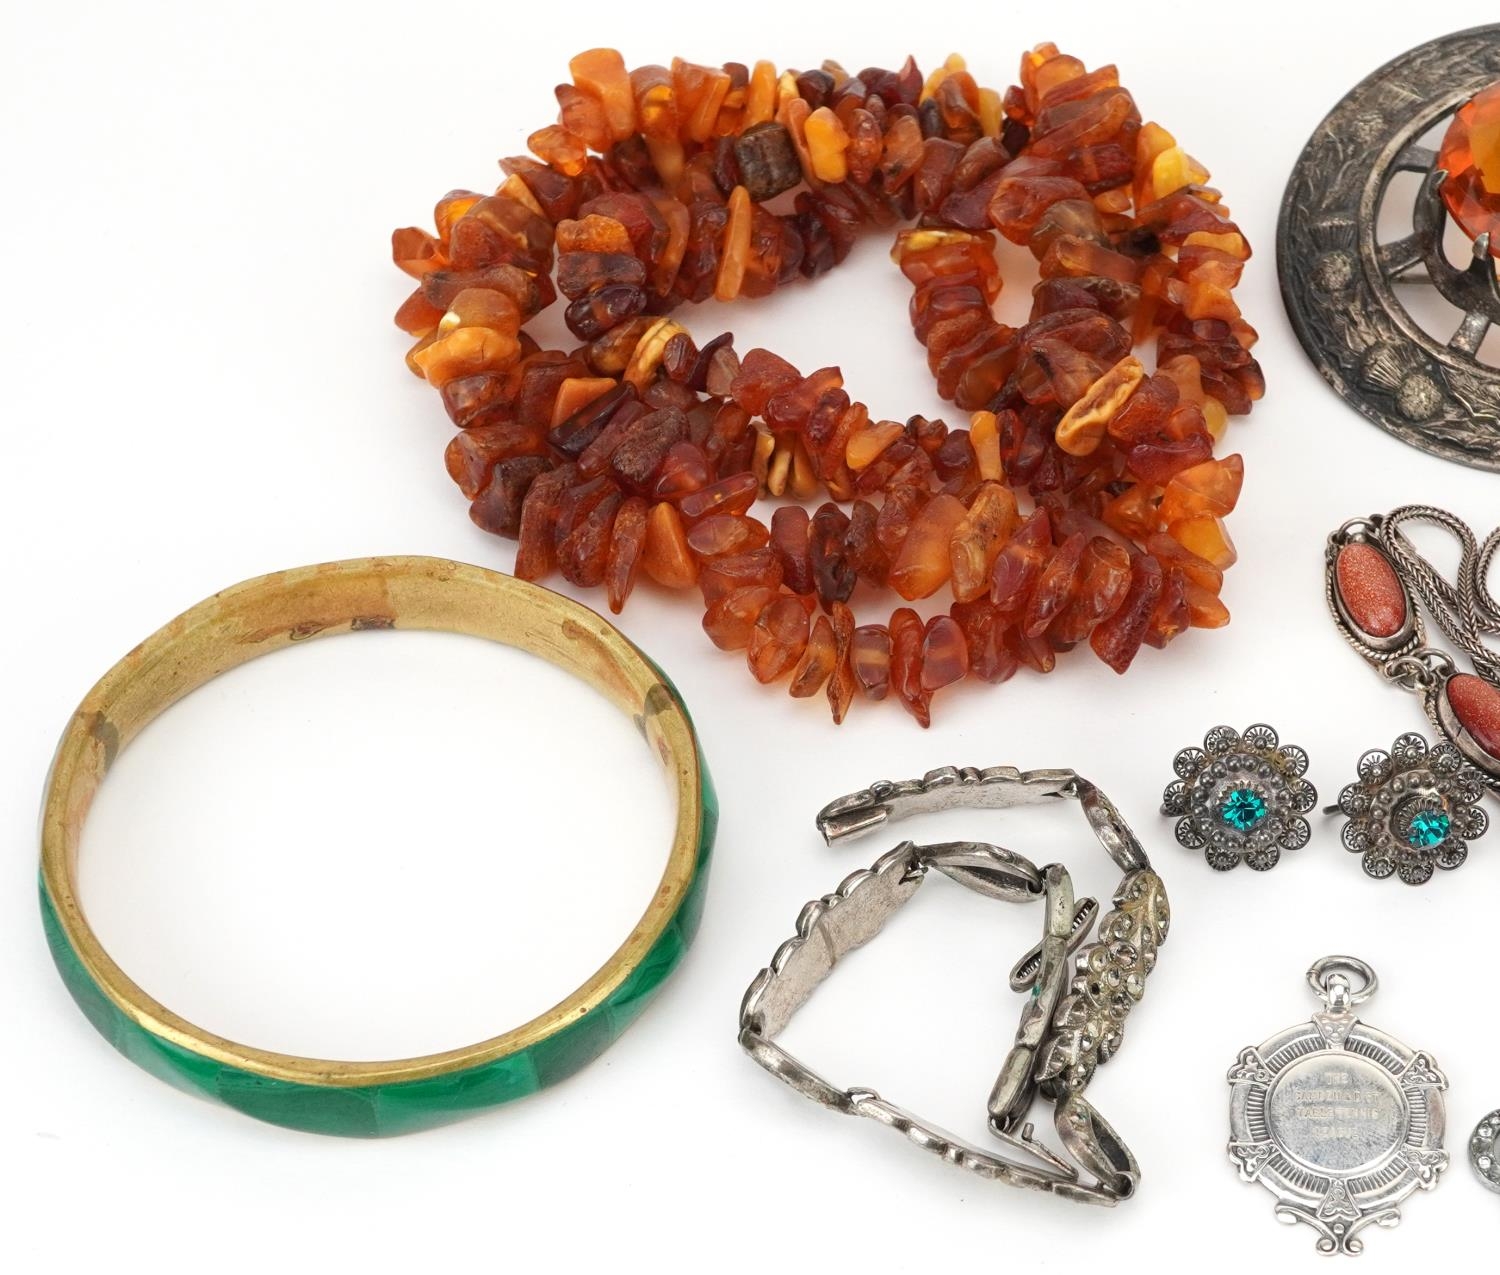 Antique and later jewellery, some silver including amber necklaces, antique style green and clear - Image 2 of 4